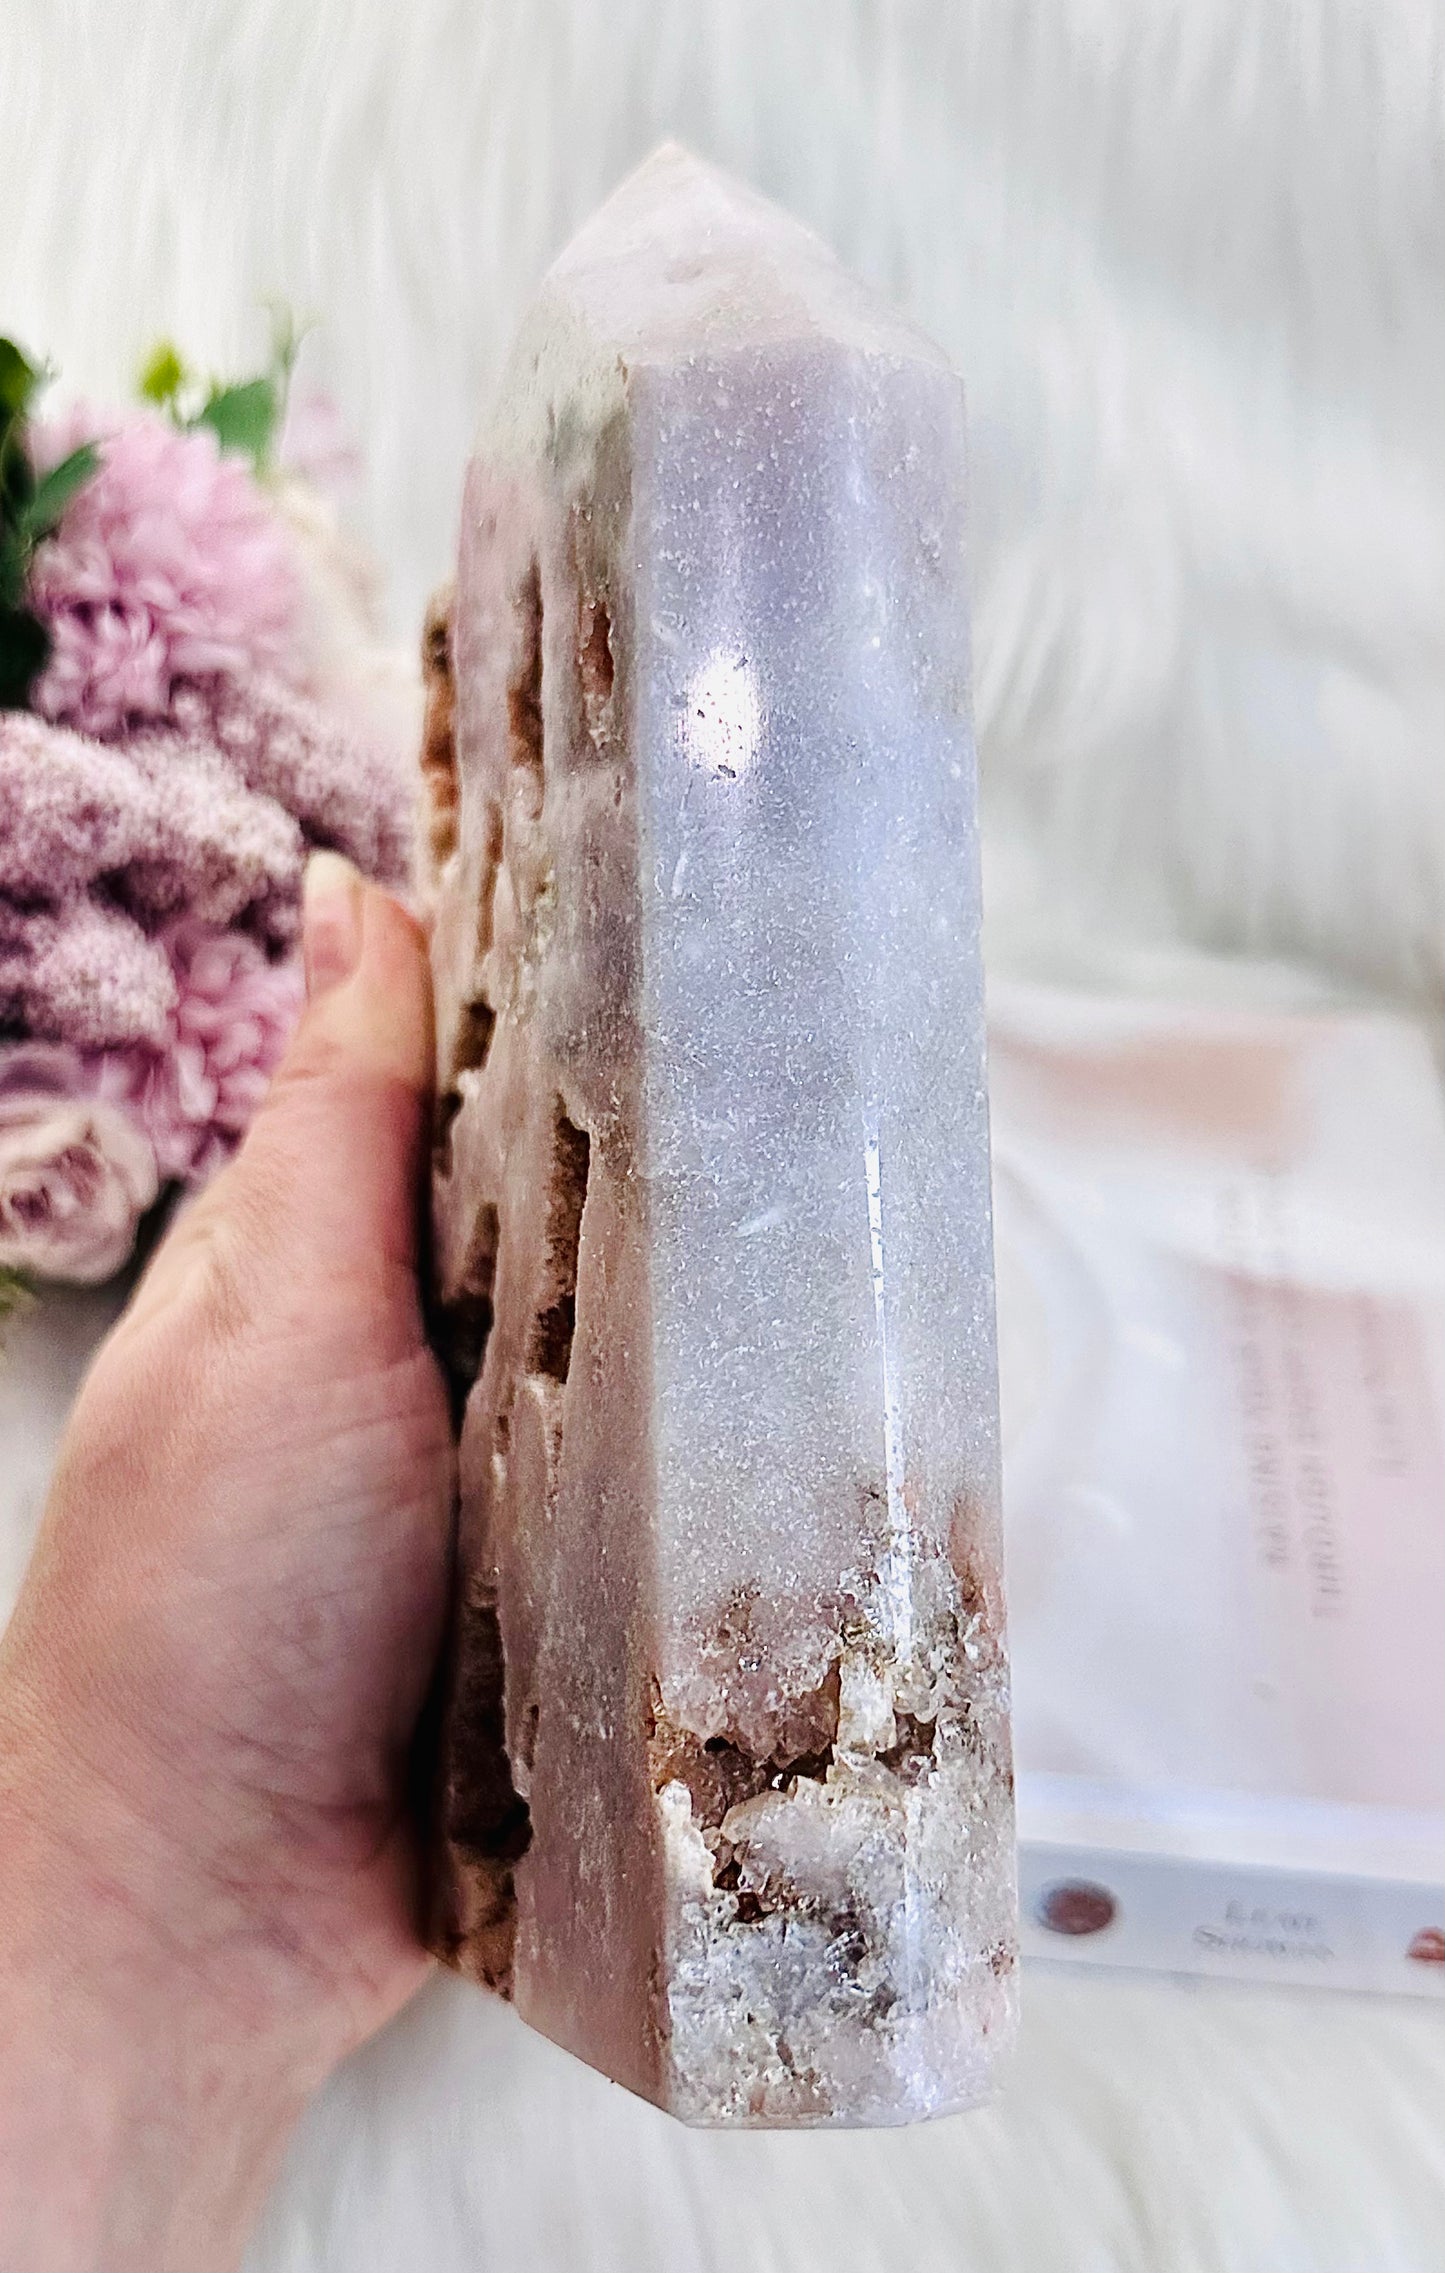 ⚜️ SALE ⚜️Fabulous New Large 1.42KG 20cm Tall Druzy Pink Amethyst Tower From Uruguay Absolutely Incredible